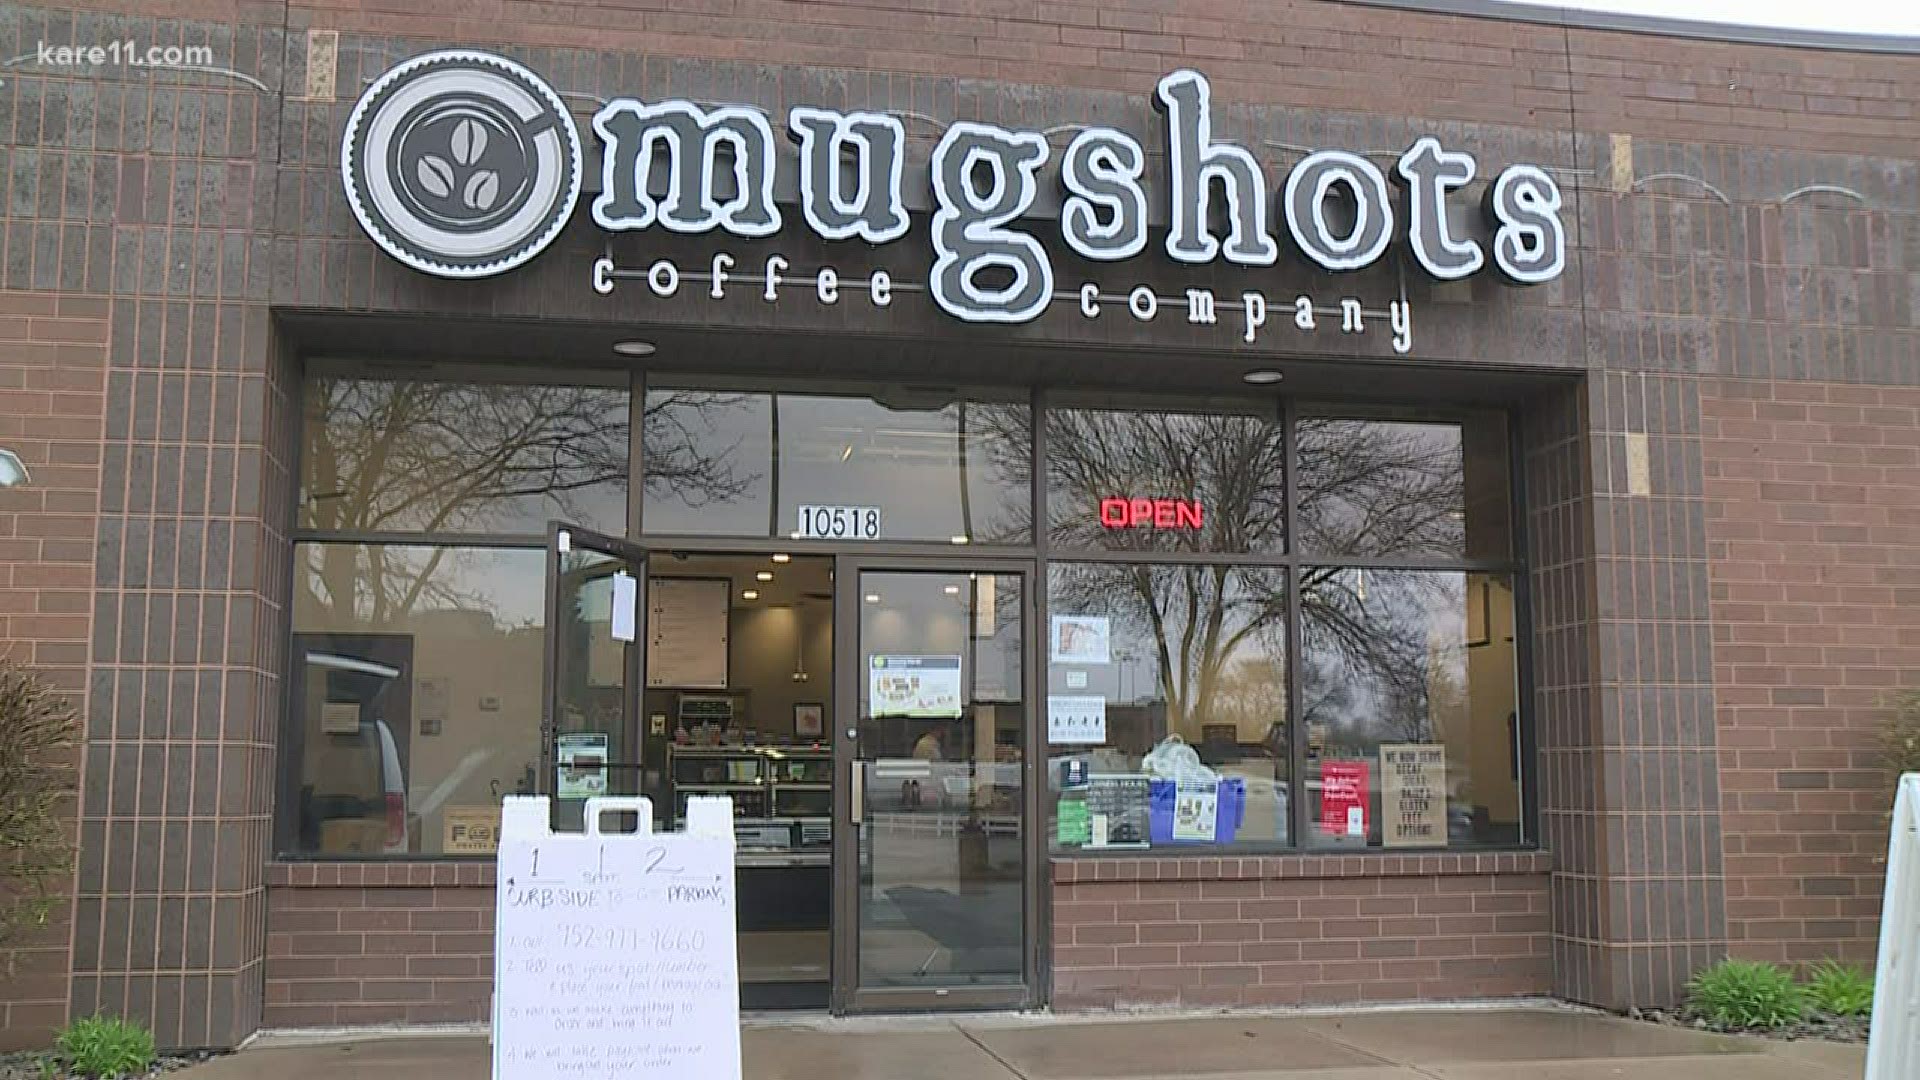 Like so many, Mugshots found a way to help their community while trying to keep their doors open.